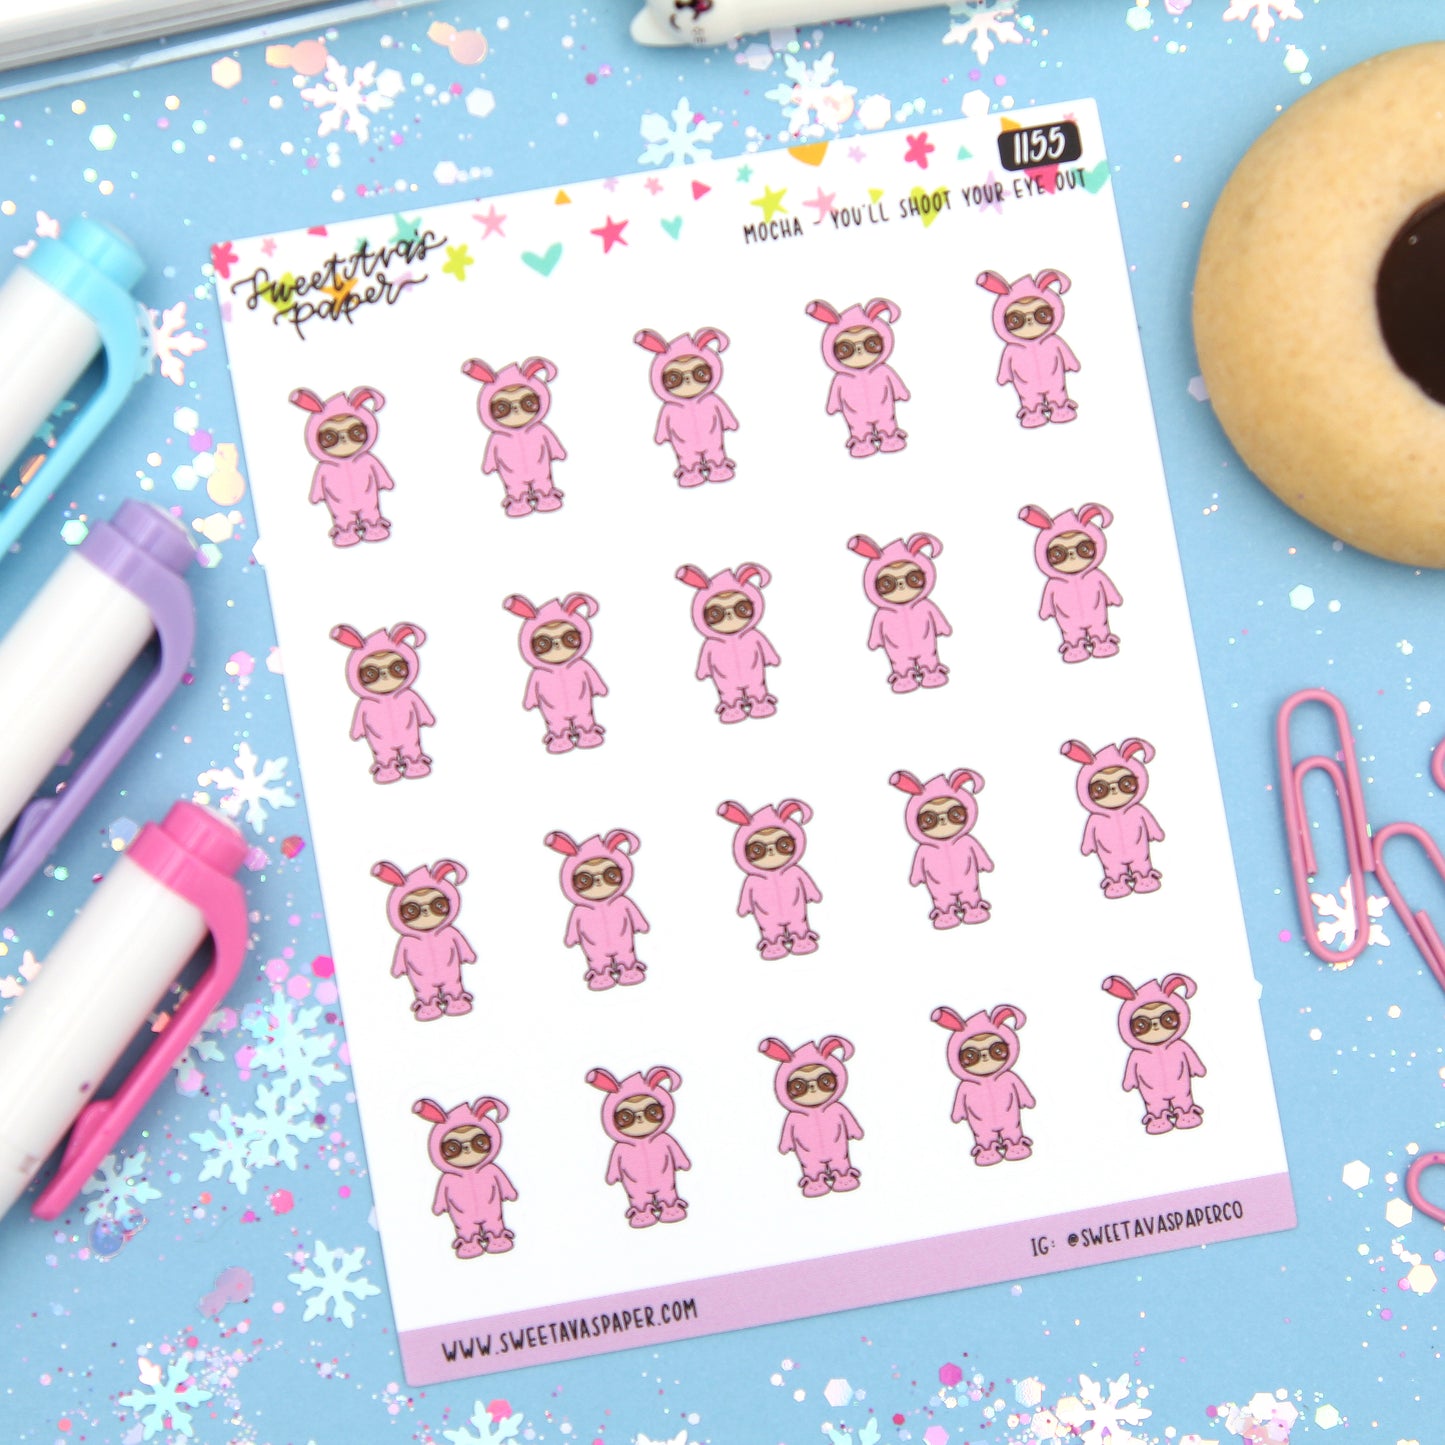 Pink Bunny Suit Planner Stickers - Mocha The Sloth [1155]